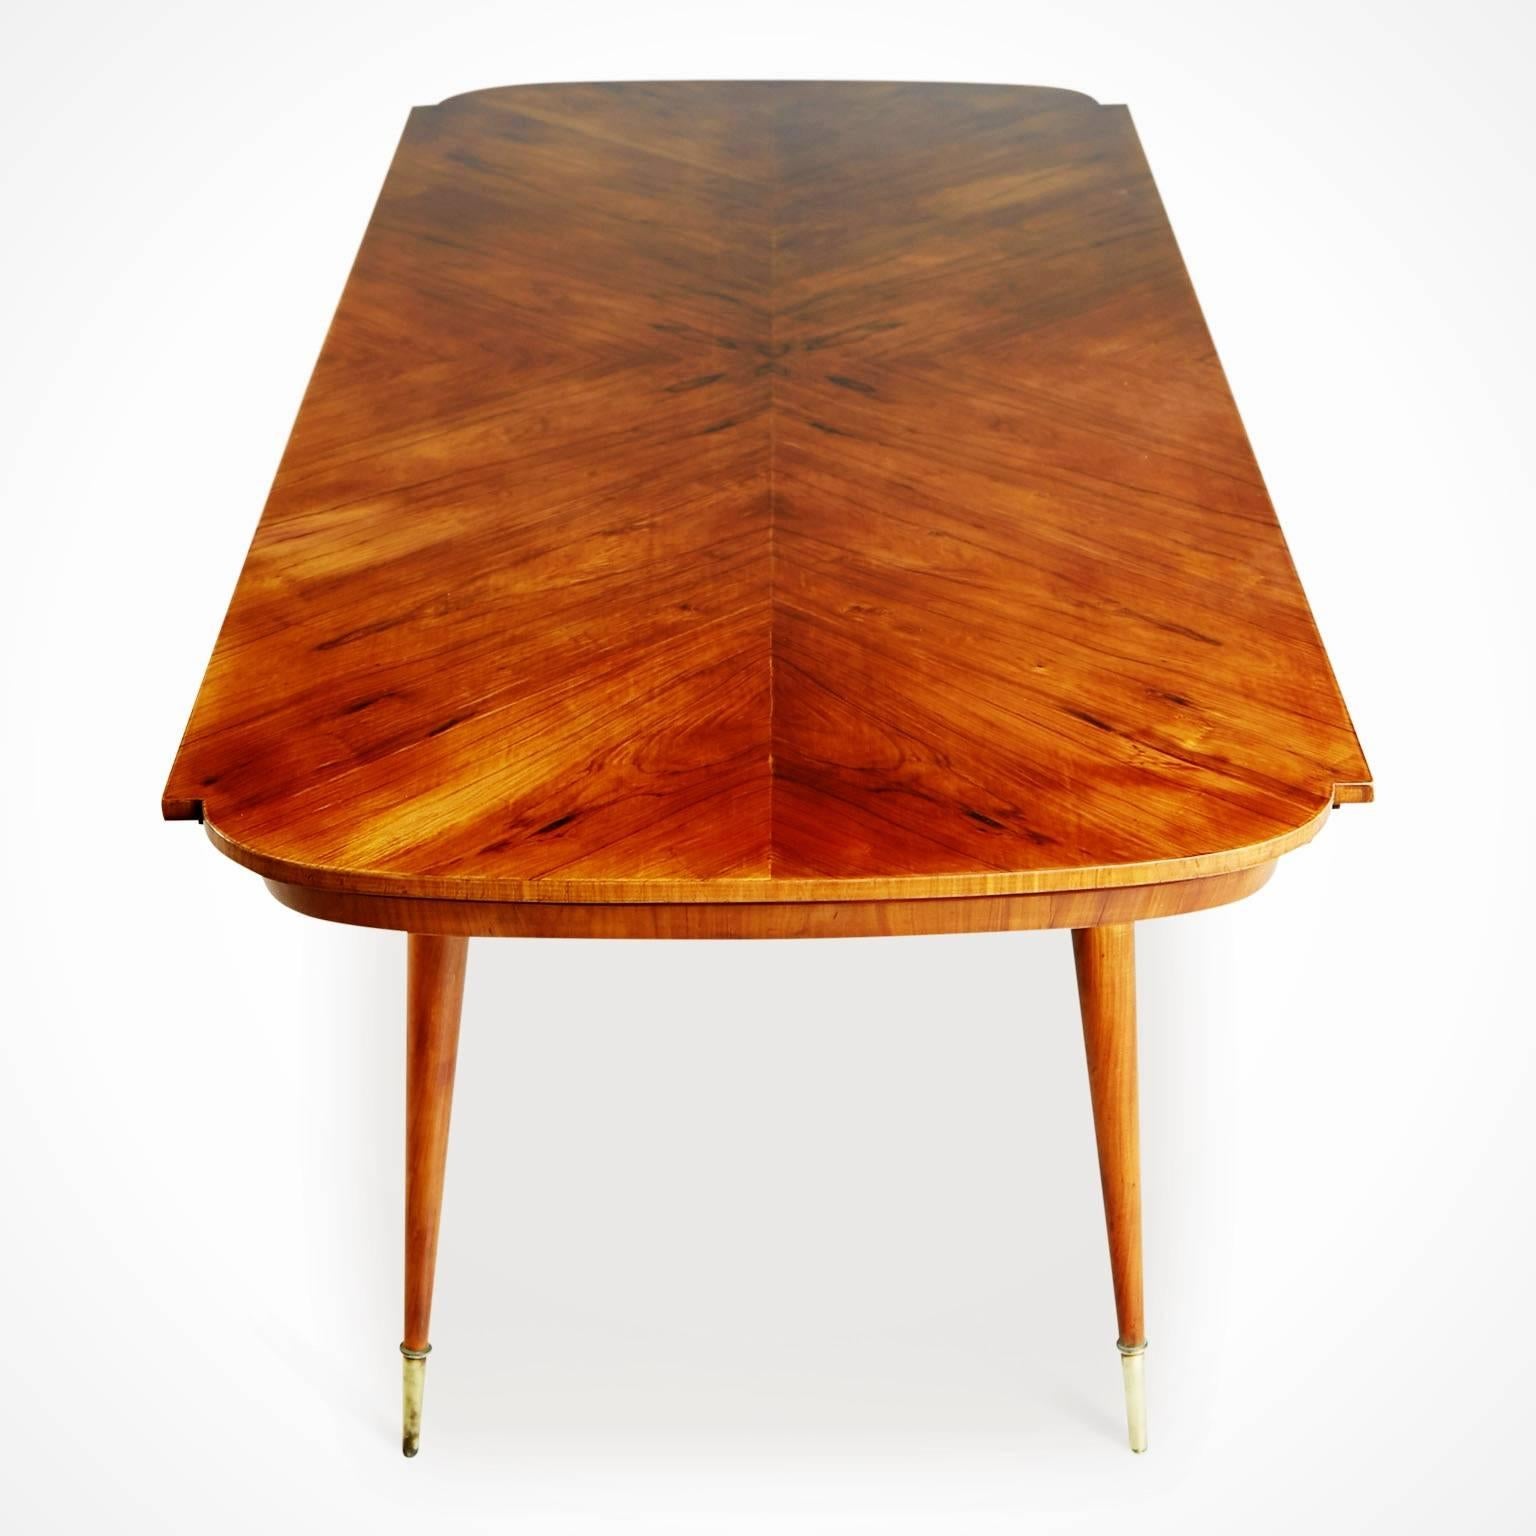 Mid-20th Century Giuseppe Scapinelli Caviuna Rosewood and Brass Dining Table, Brazil, circa 1950